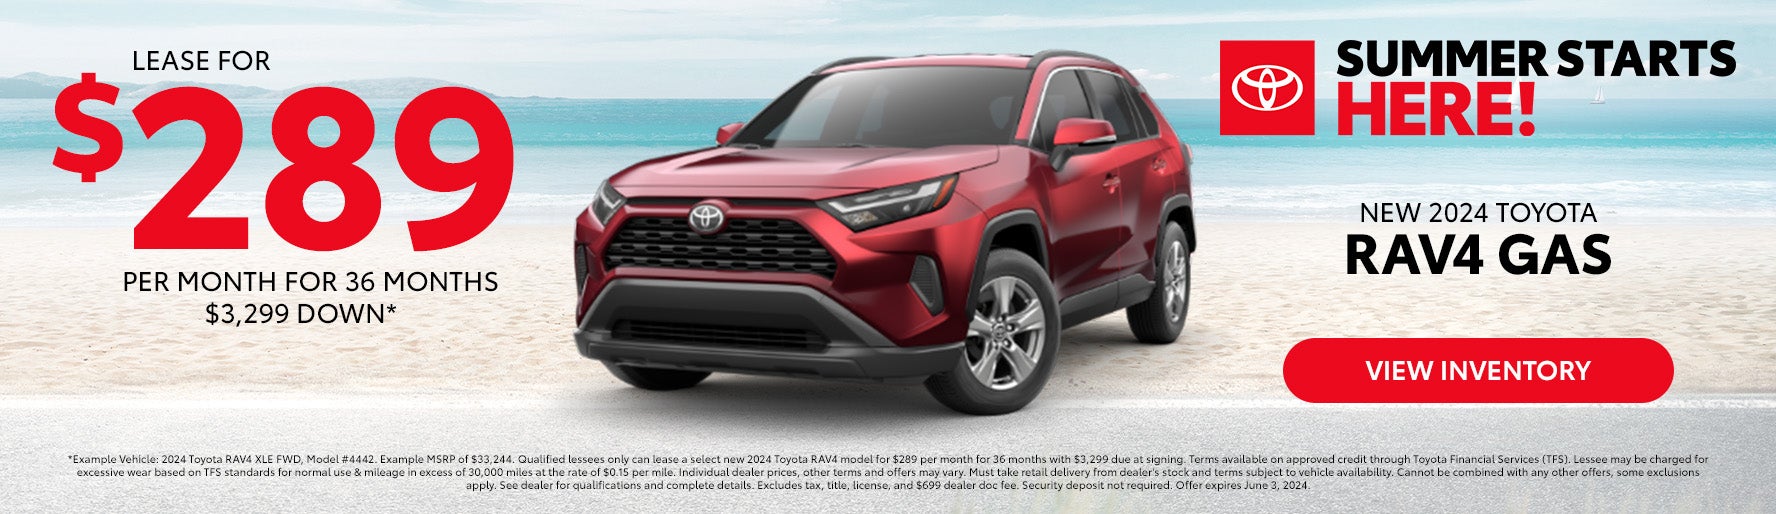 2024 Toyota RAV4 Gas Lease for $289/mo. for 36 mo